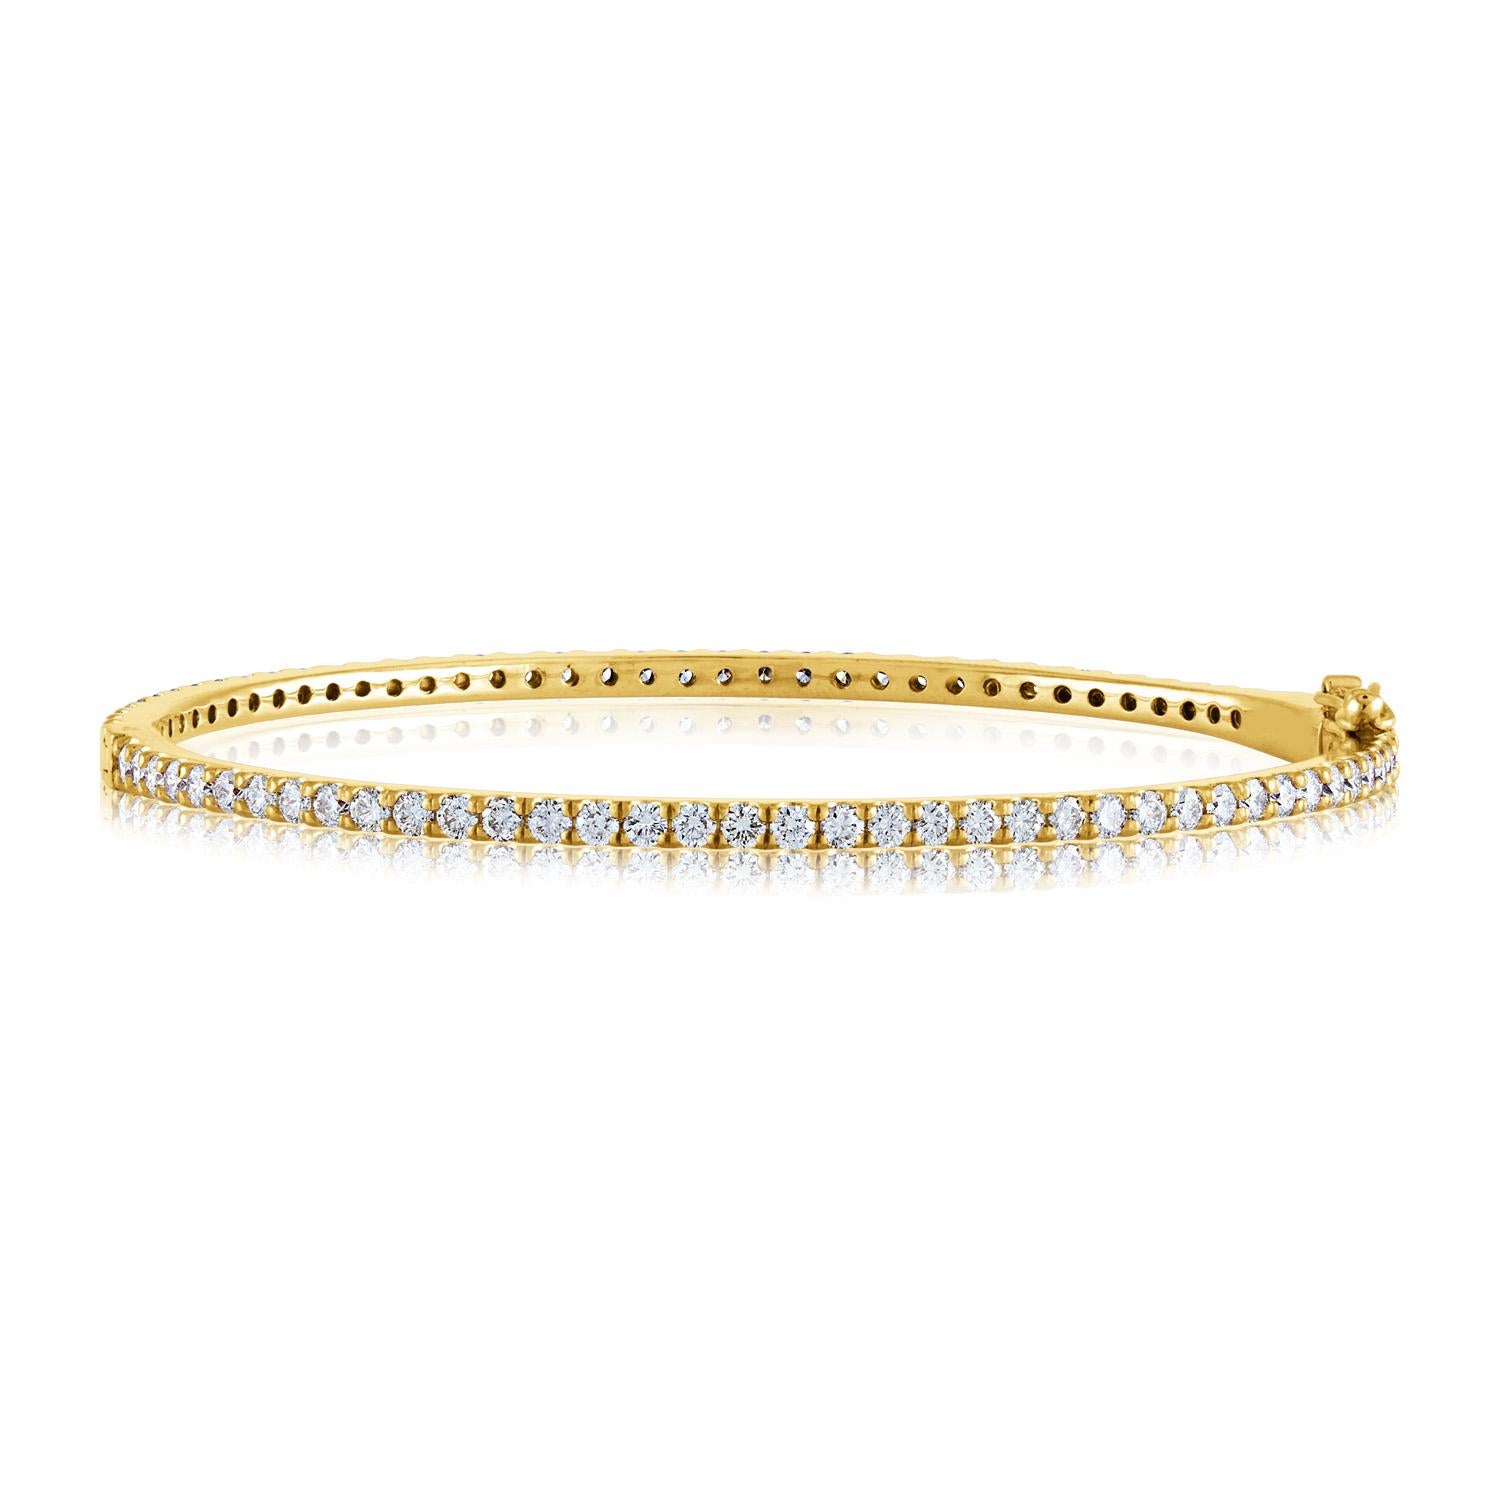 All around Diamond Gold Bangle Bracelet
The bracelet is 14K Rose Gold or Yellow Gold
There is 2.40 Carats in Diamonds F/G VS/SI
Fits up to 6.50 inch wrist.
The bracelet weighs 9.9 grams
Available in rose gold  or yellow gold
Please specify Gold